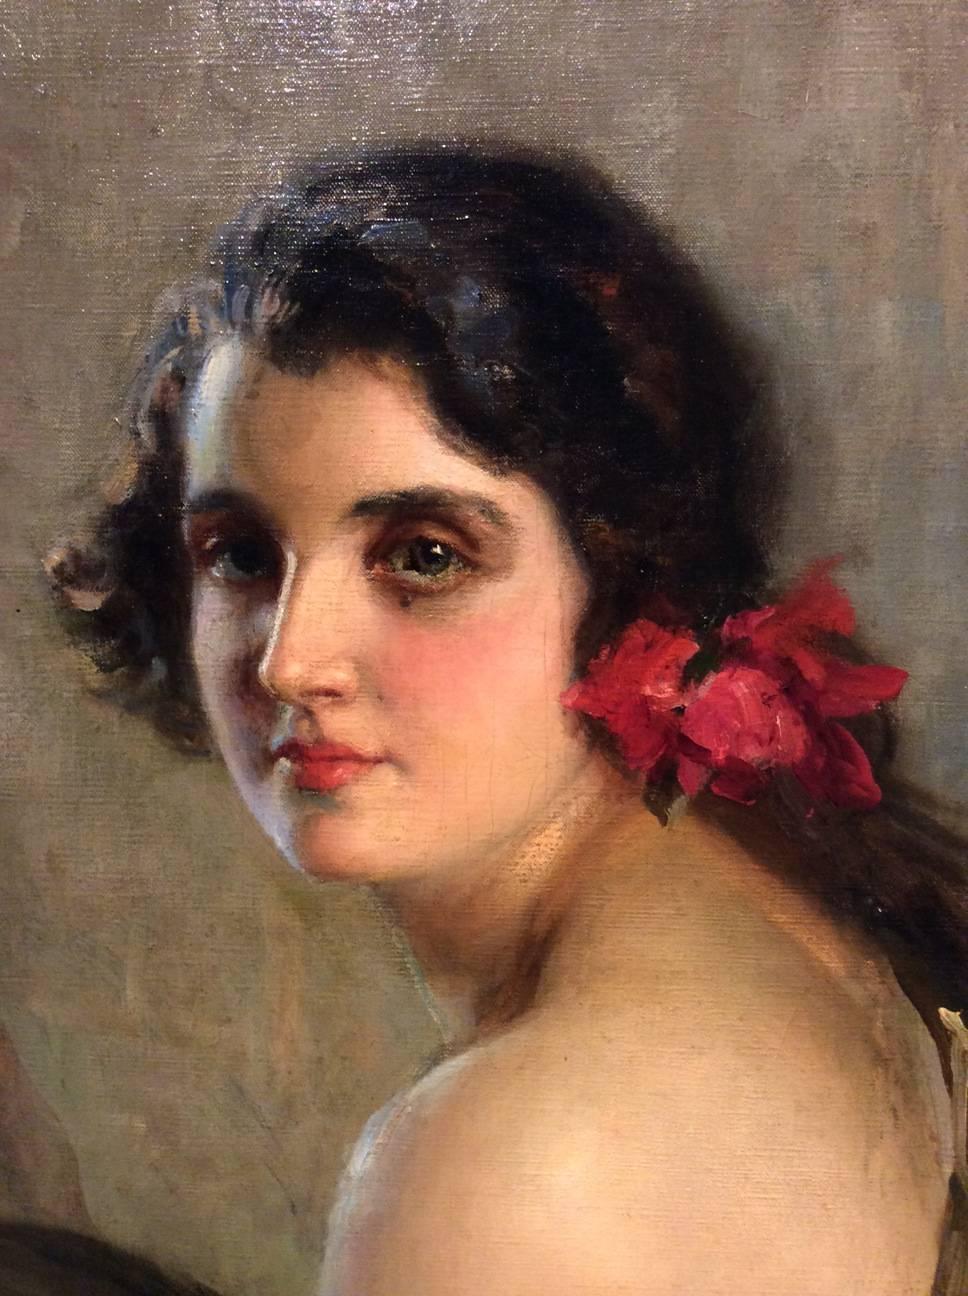 Portrait of a young woman holding a tambourine, signed upper left Edouard Bisson, French painter 1856-1939.
Born in Paris in 1856, Bisson studied art under one of the most successful of French artists, Jean Leon Gerome. He exhibited regularly at